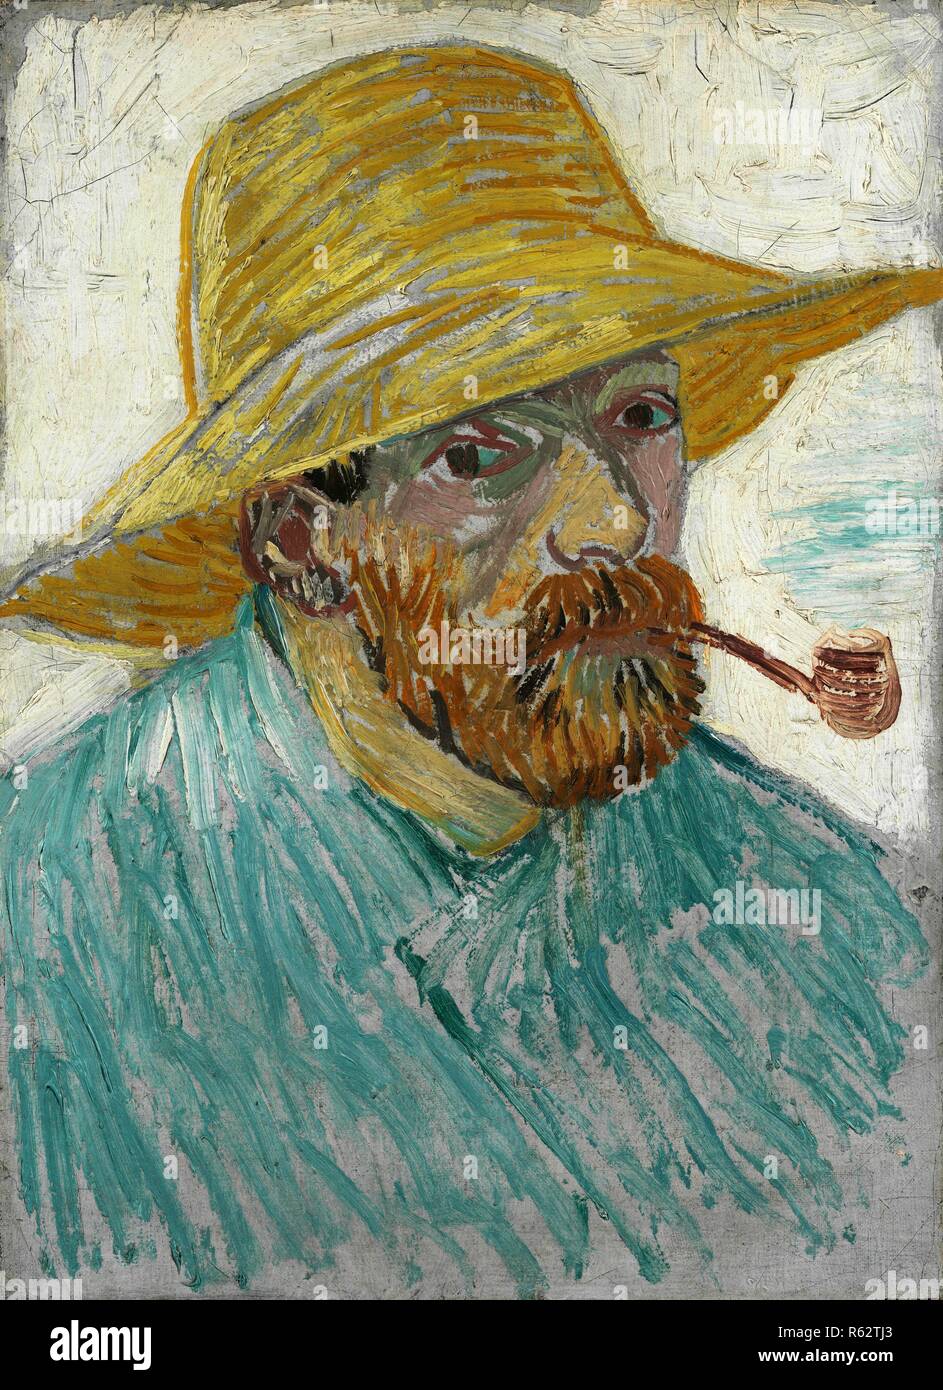 Self-Portrait with Pipe and Straw Hat. Date: September-October 1887, Paris.  Dimensions: 41.9 cm x